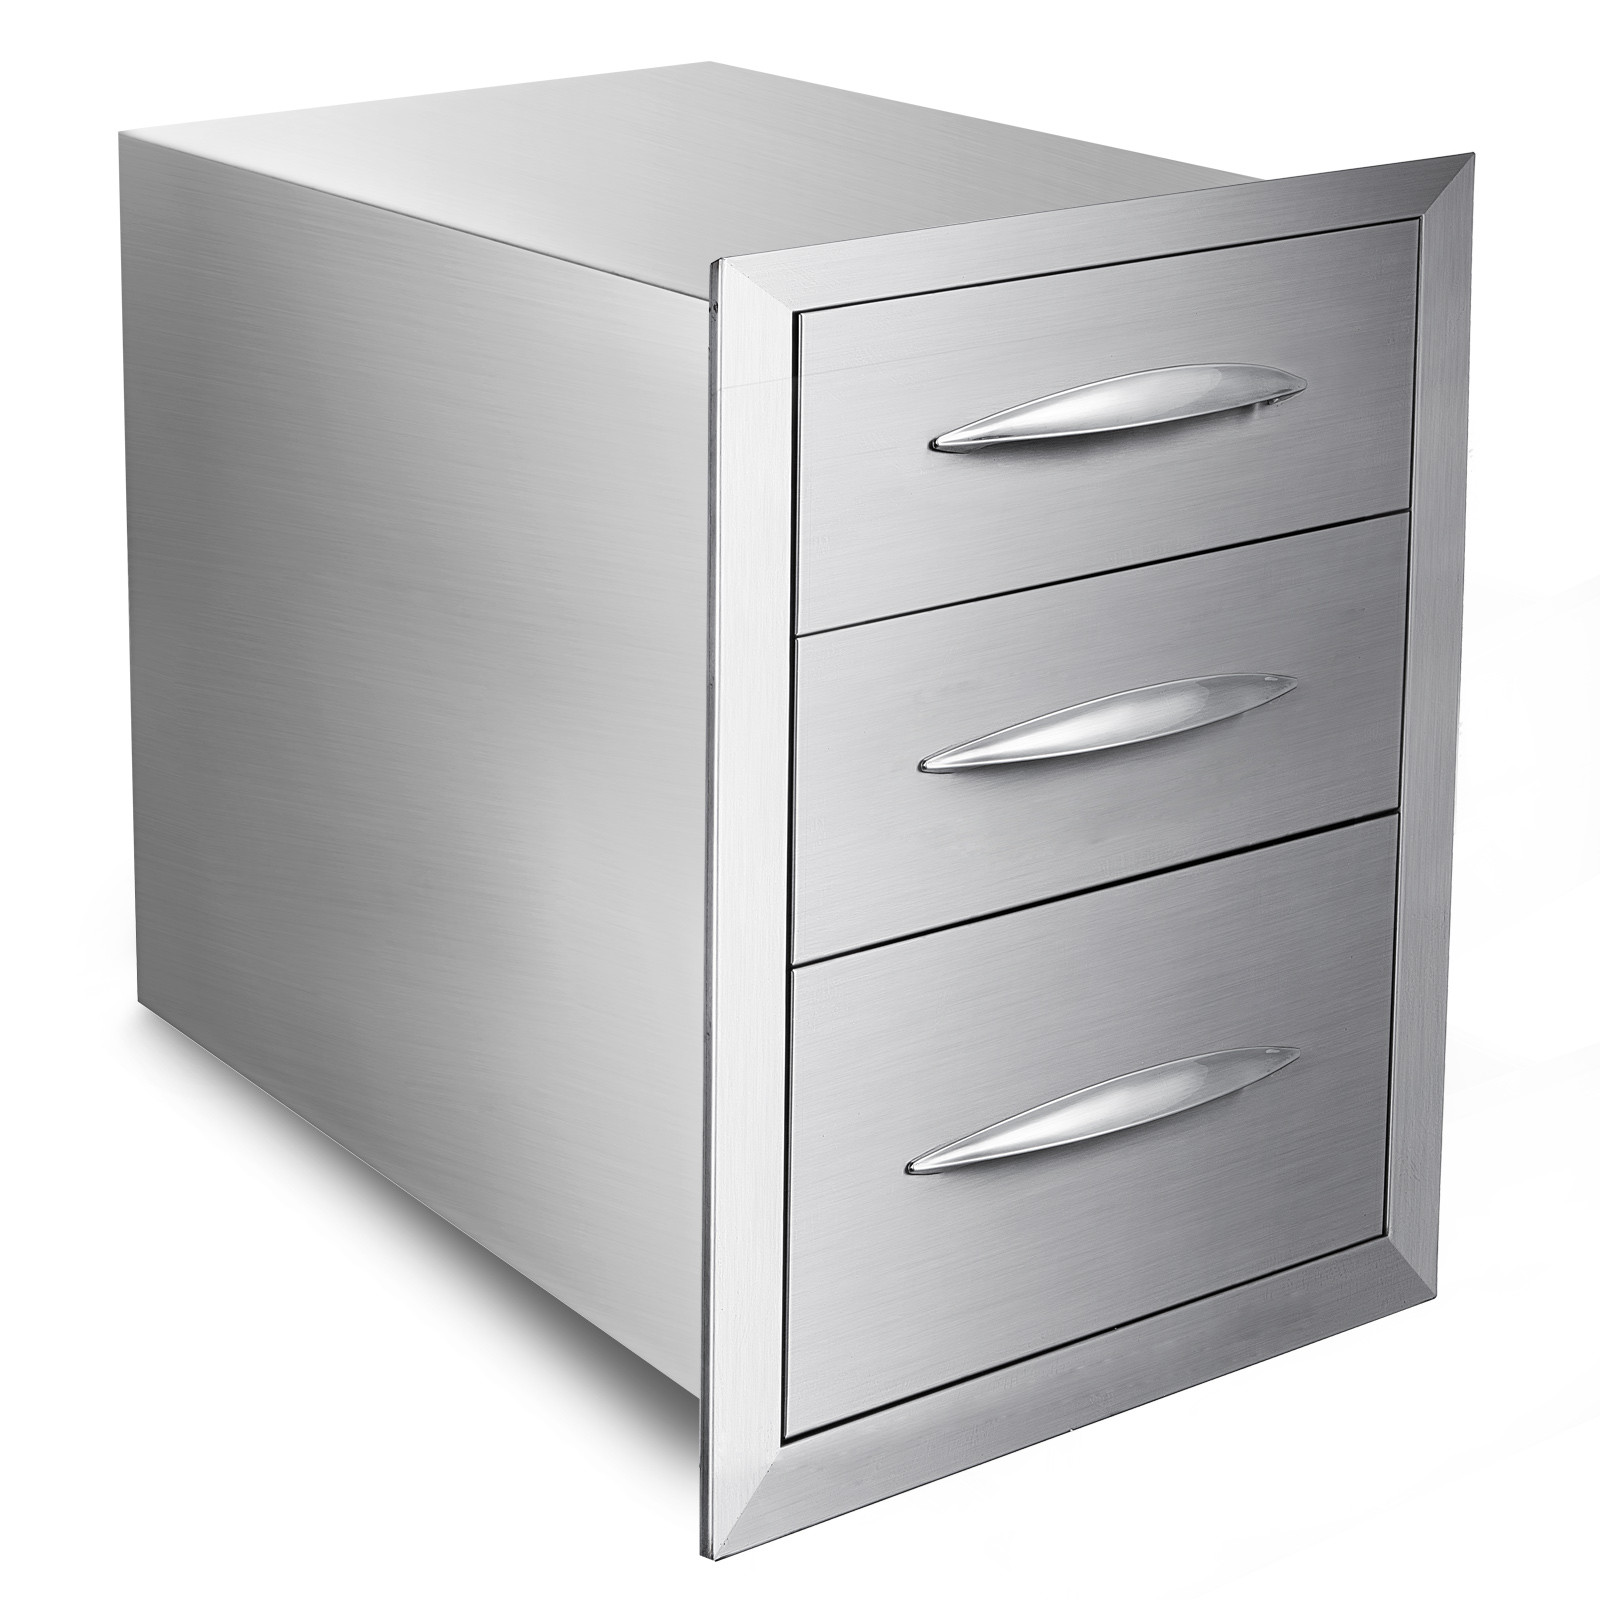 Outdoor Kitchen Doors And Drawers
 Outdoor Kitchen Drawer Door Access BBQ Drawer Stainless